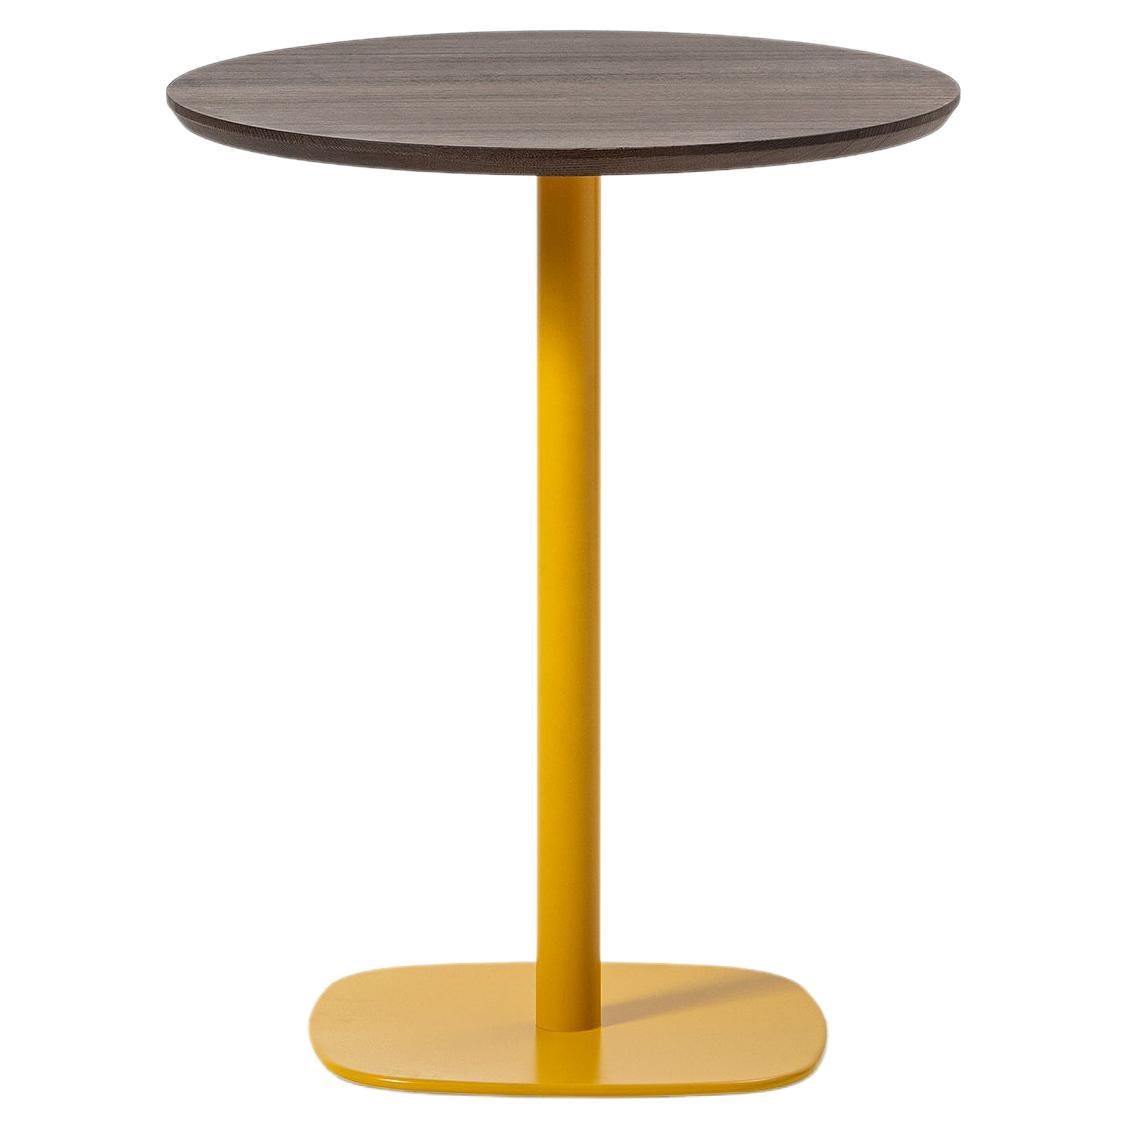 Chairs, lounges and stools: every type of seat can count on a functional and at the same time stylish coffee table. Round Table is available in three different heights and has a metal base that can be customized in a wide range of colors or in a